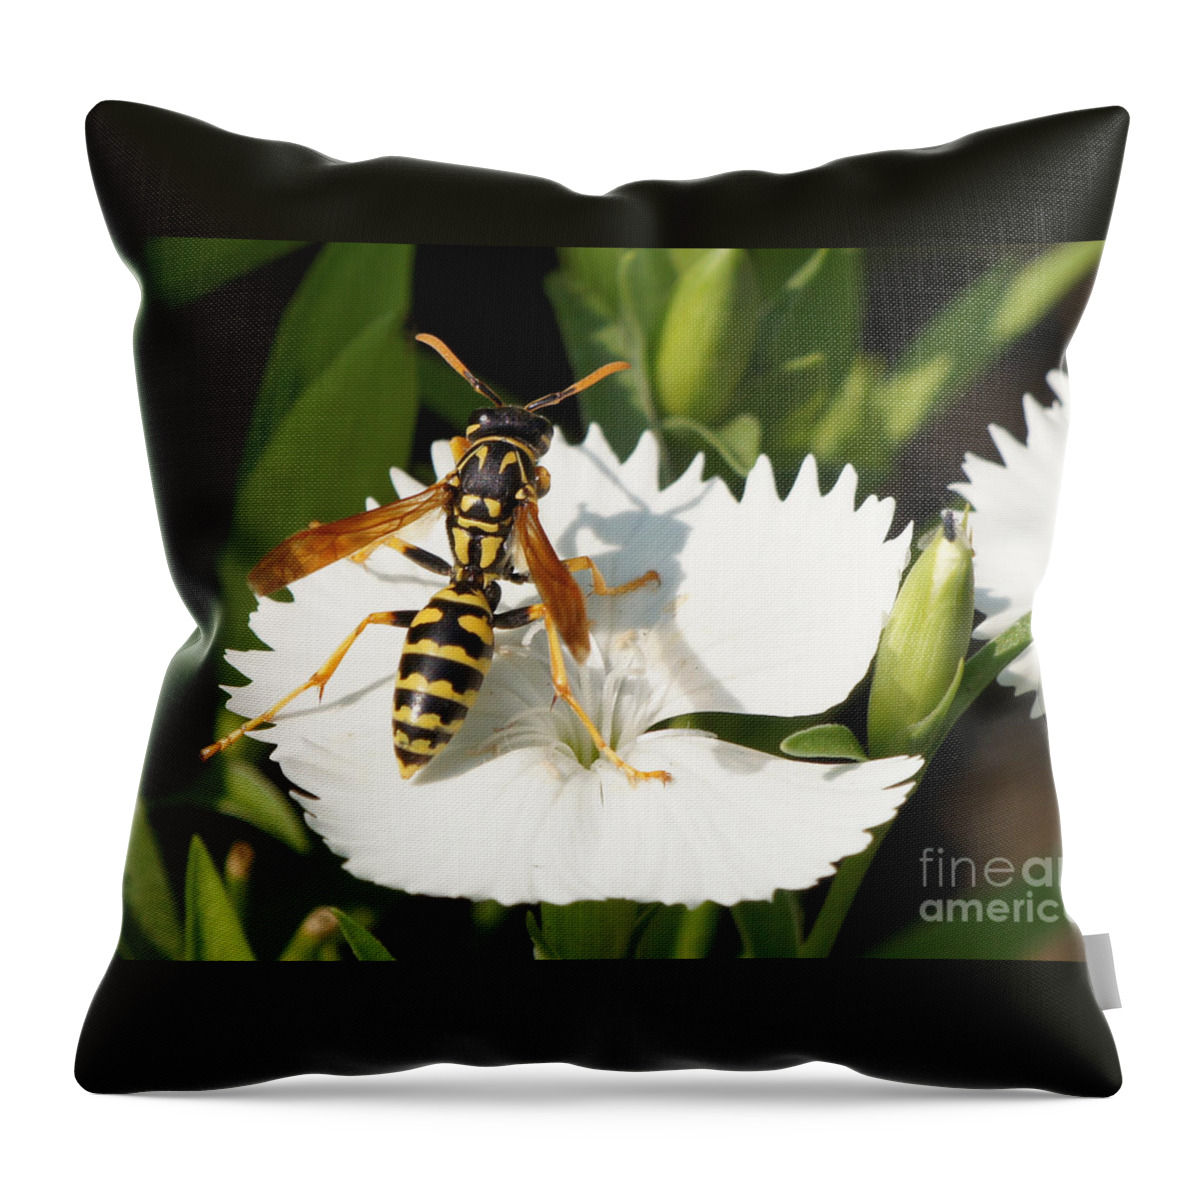 Wasp Throw Pillow featuring the photograph Wasp on Dianthus Floral Lace White Flower 3 by Robert E Alter Reflections of Infinity